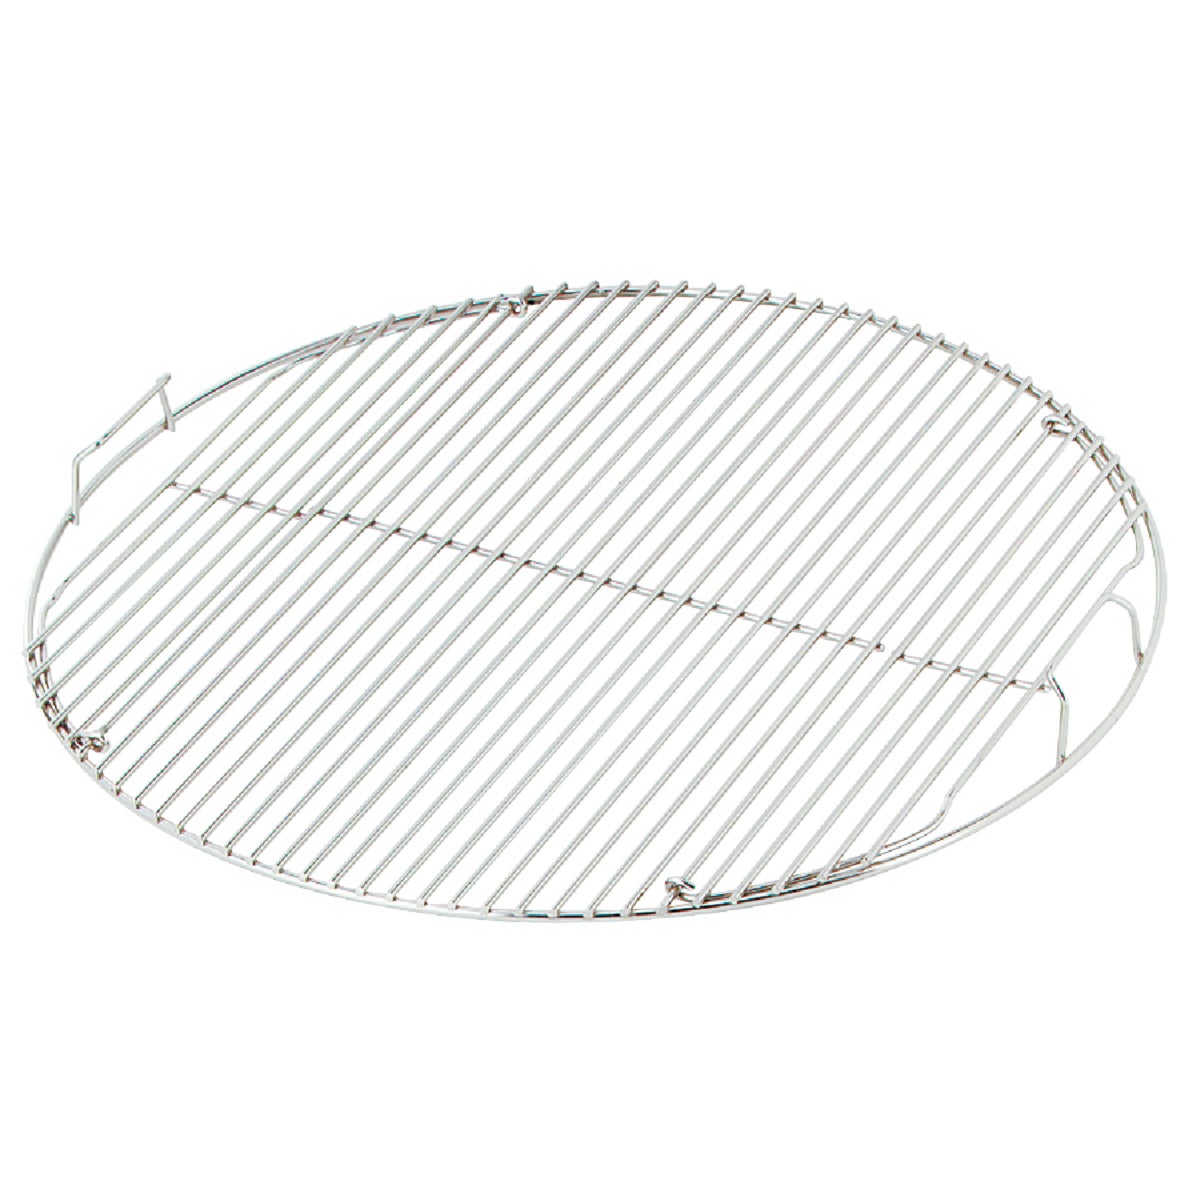 Item 844608, Hinged cooking grate which allows for easy addition of briquettes while 